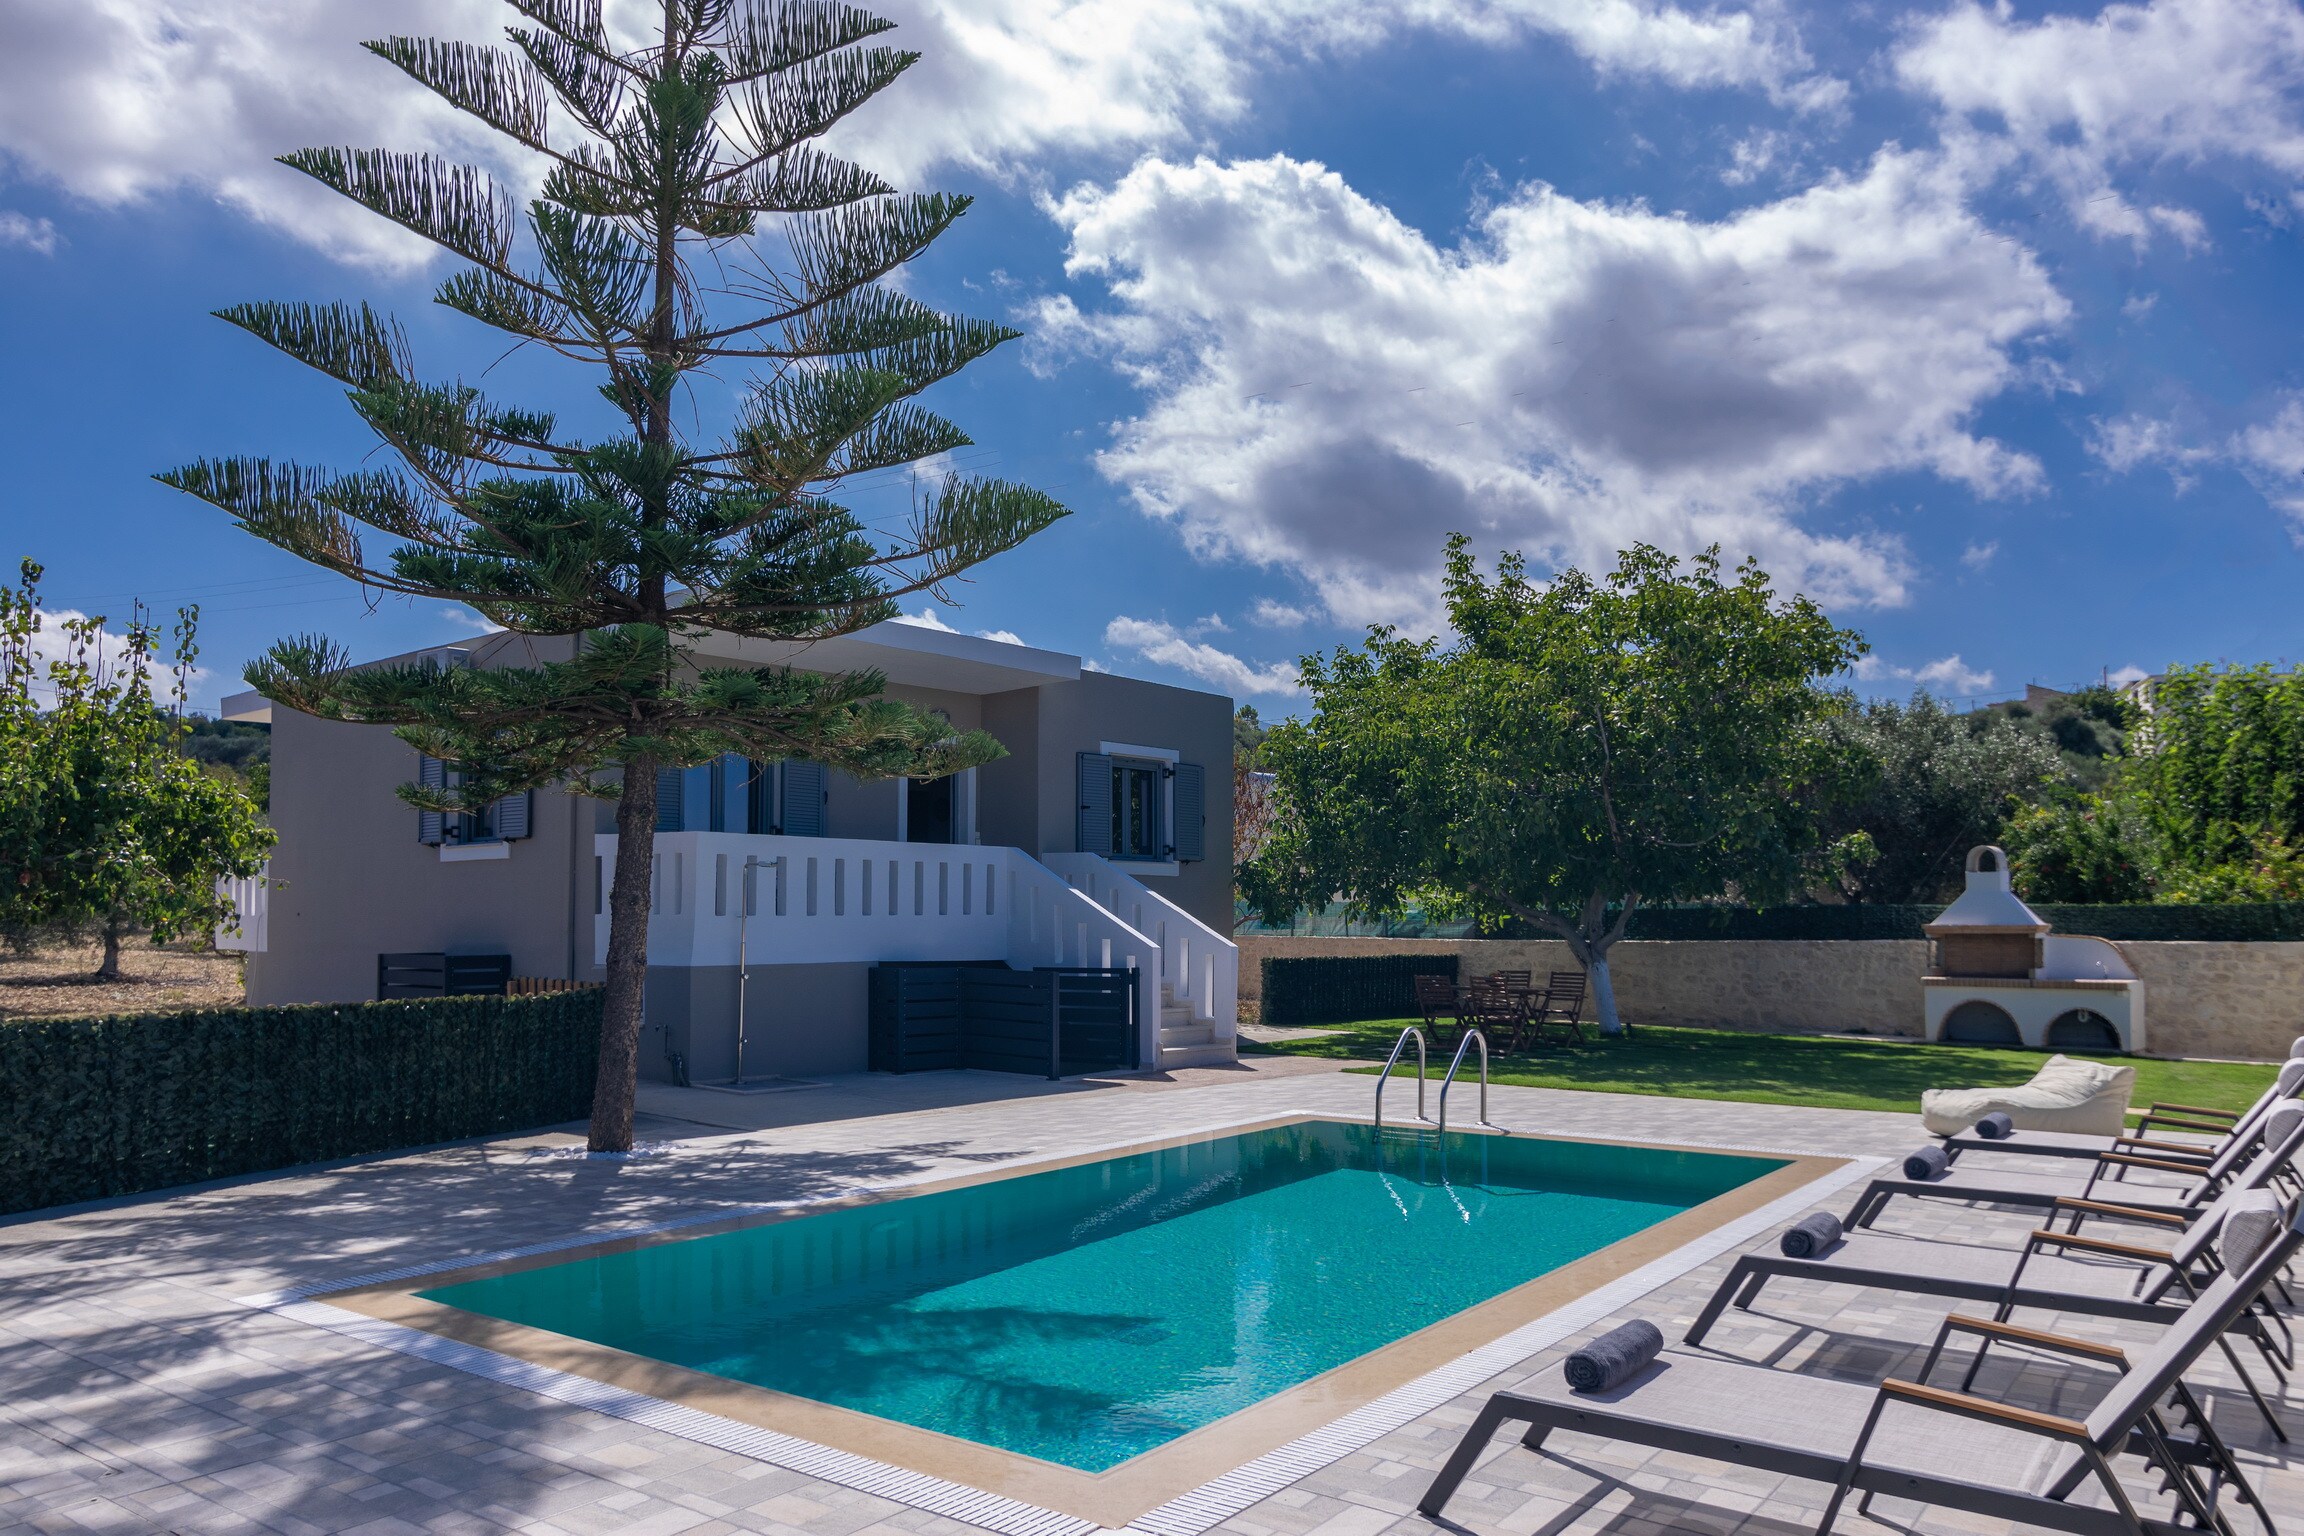 Main facade and swimming pool of Modern rural villa,Private pool,For Families,Ideal location,Rethymno,Crete